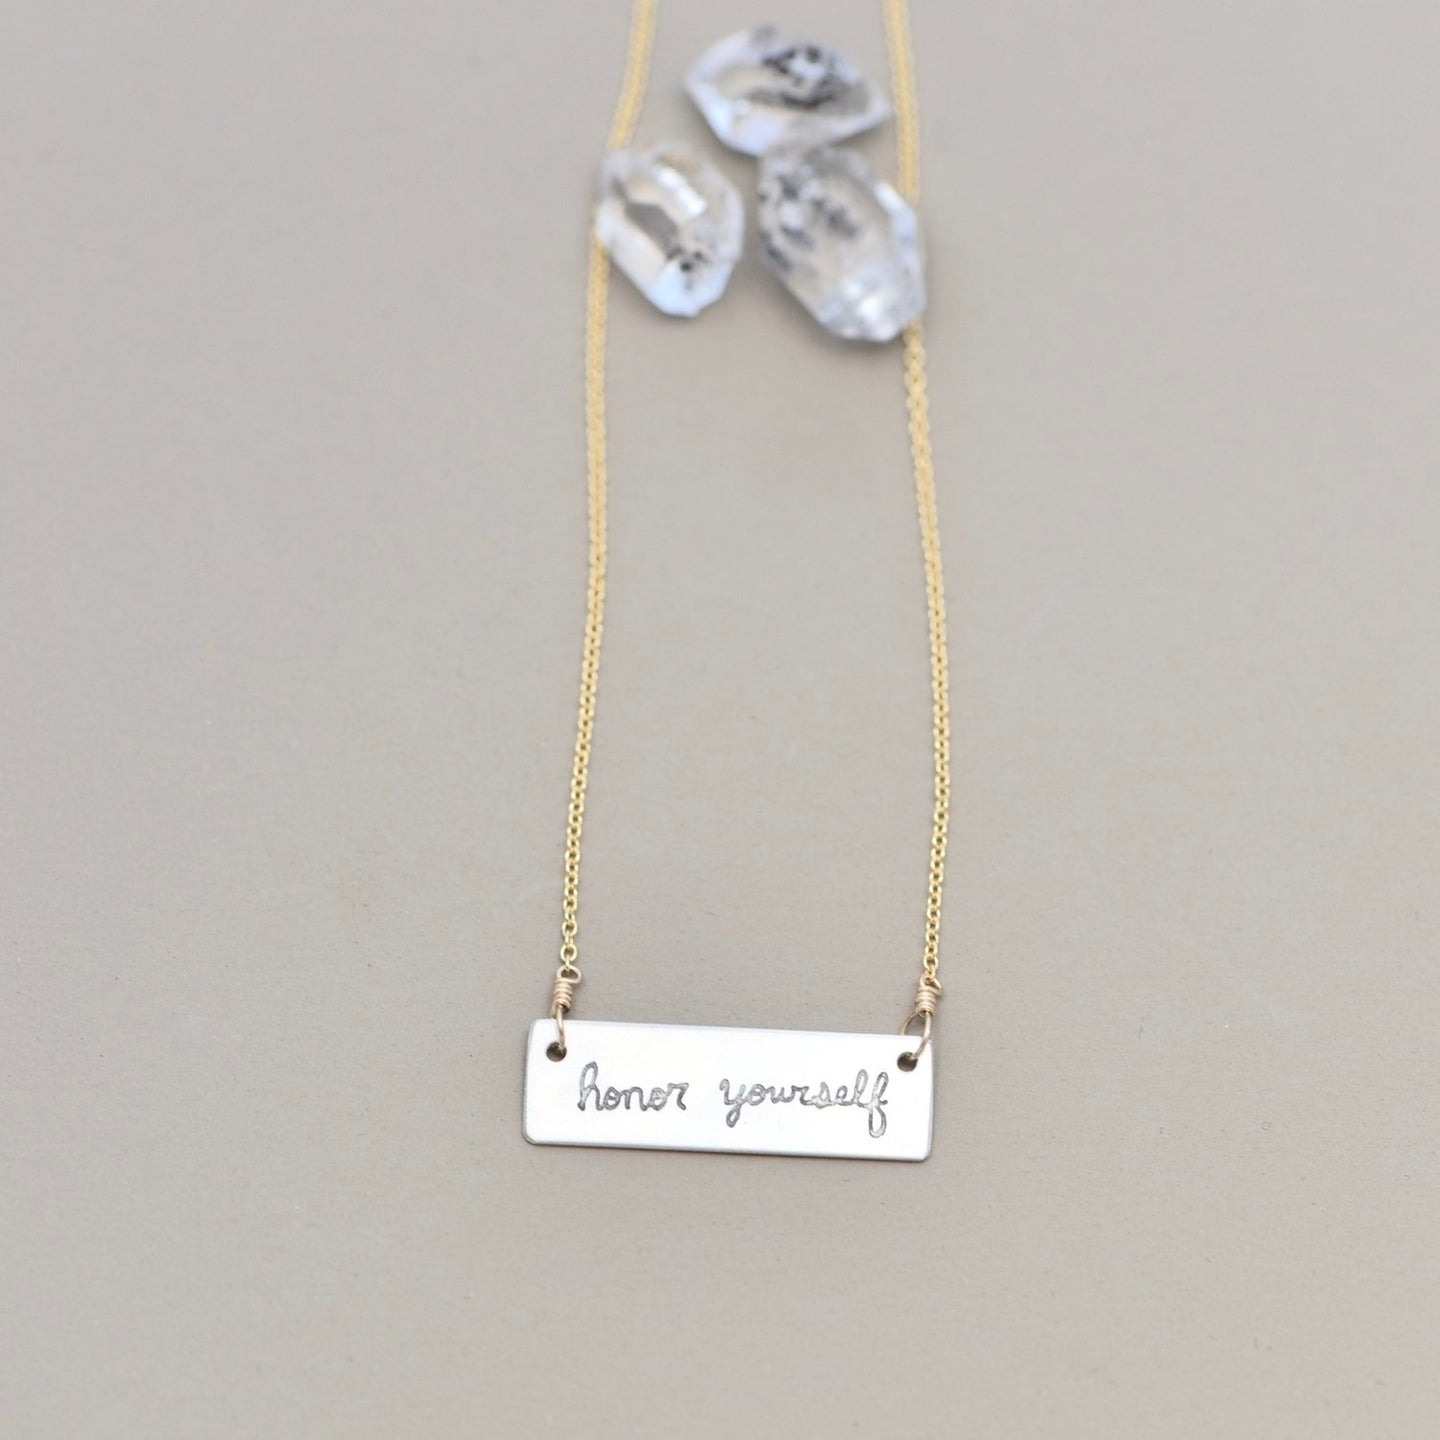 Honor Yourself Necklace